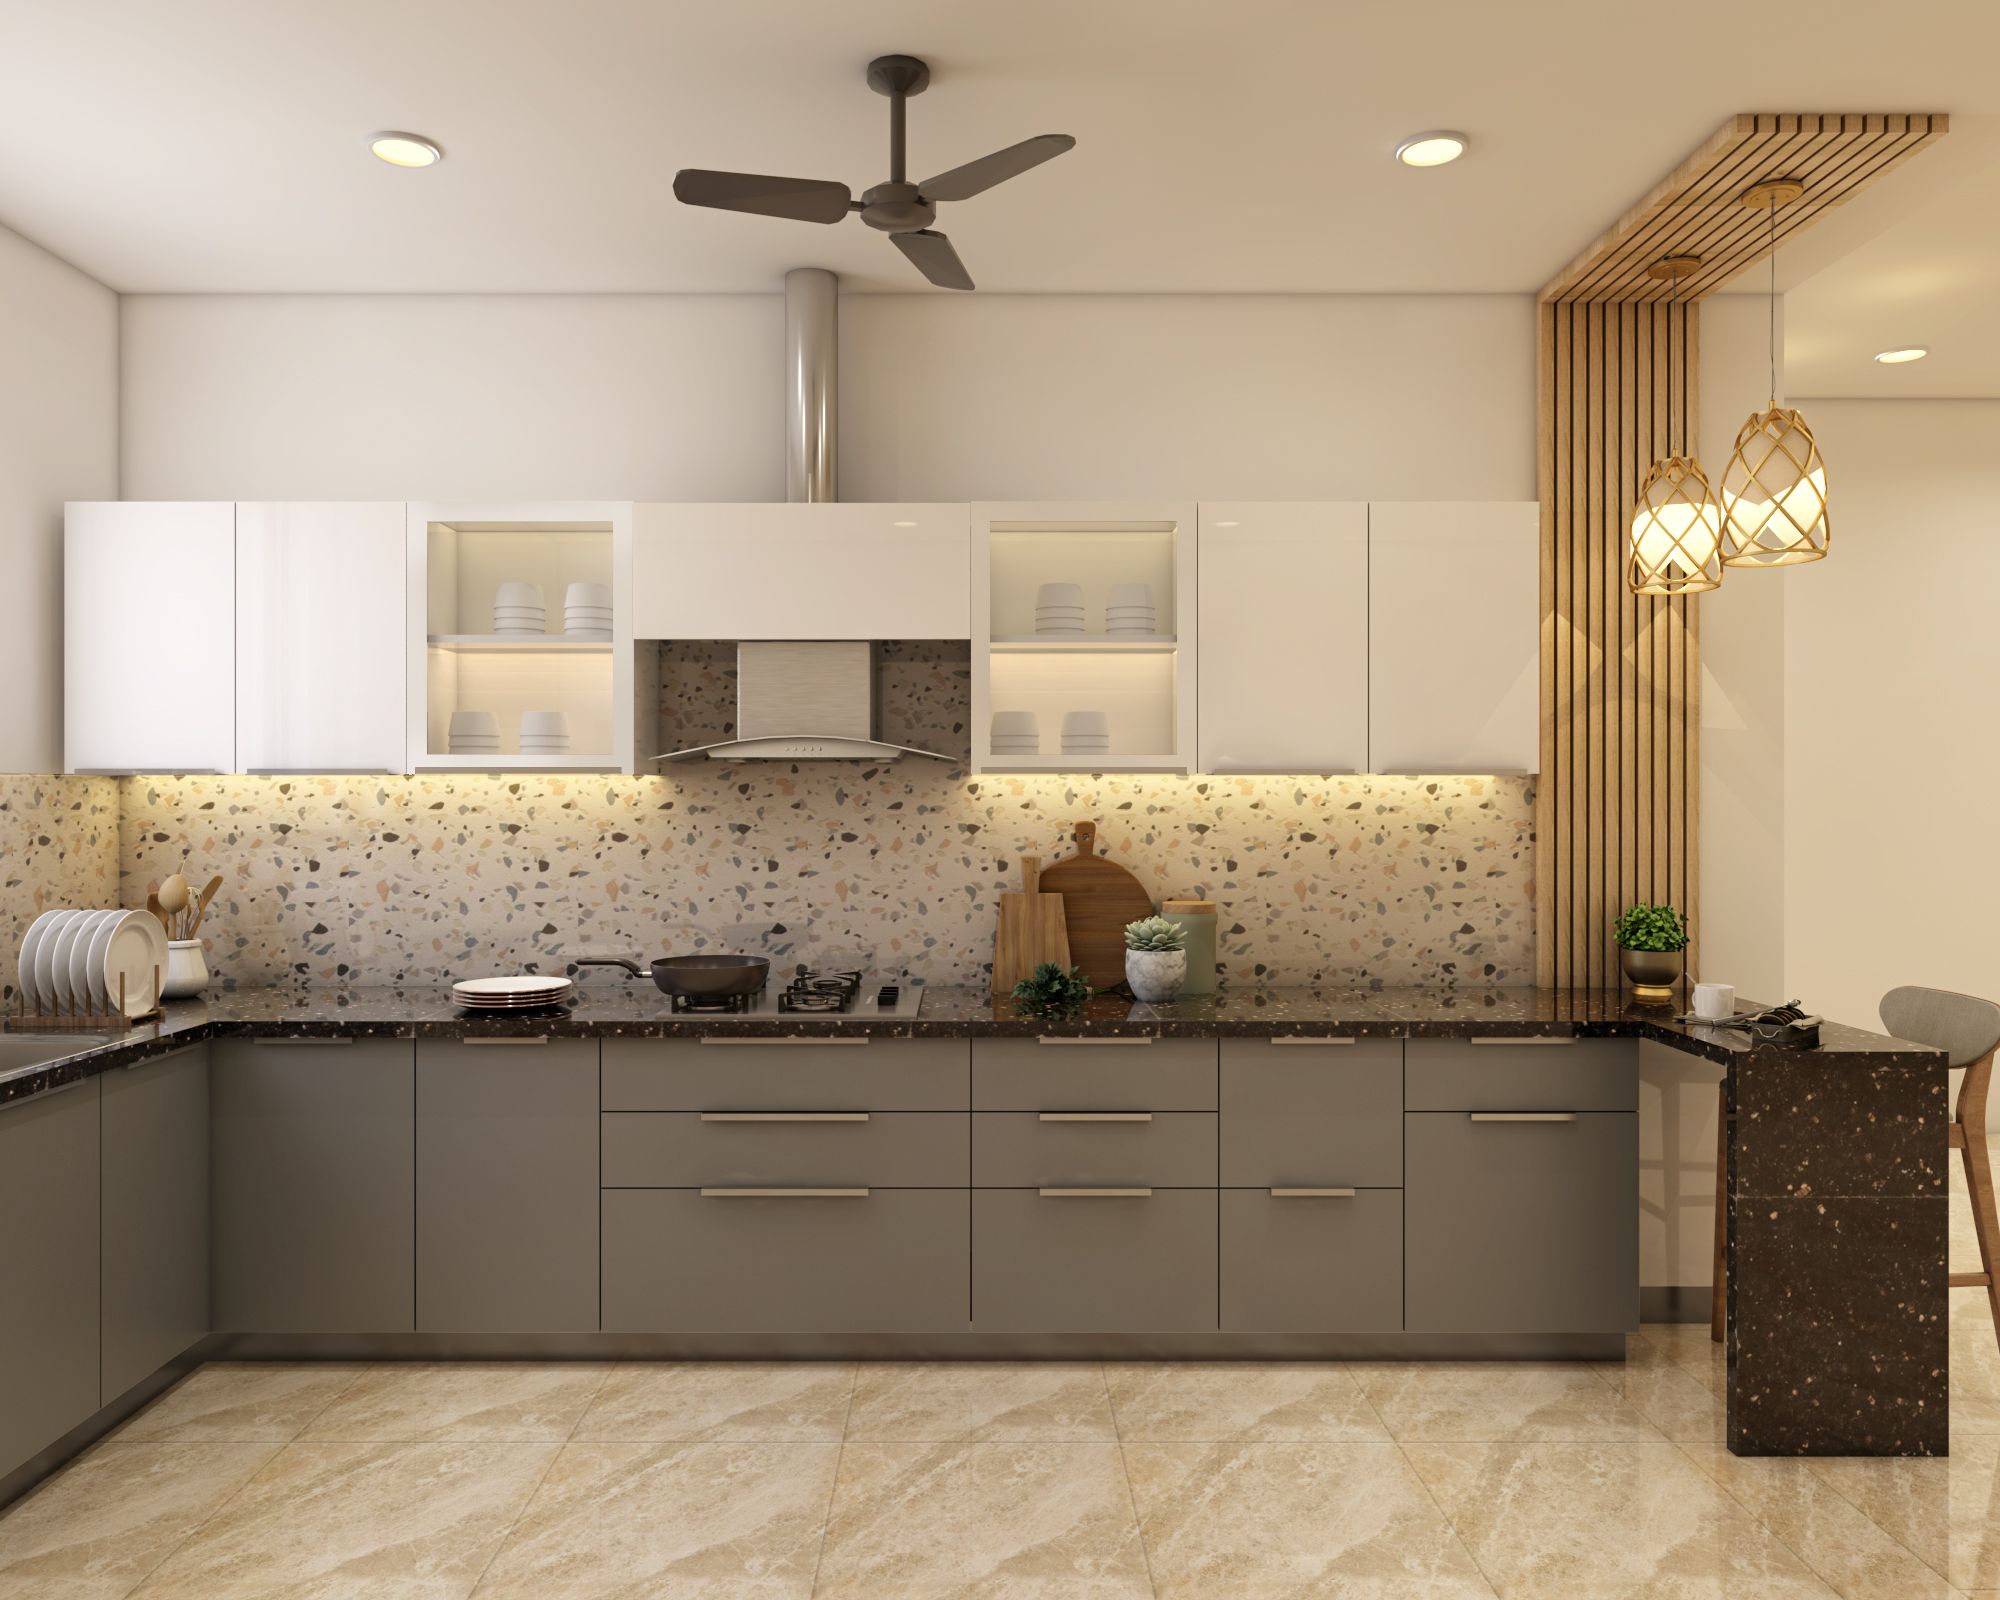 Contemporary Kitchen Design With Grey Coloured Cabinets